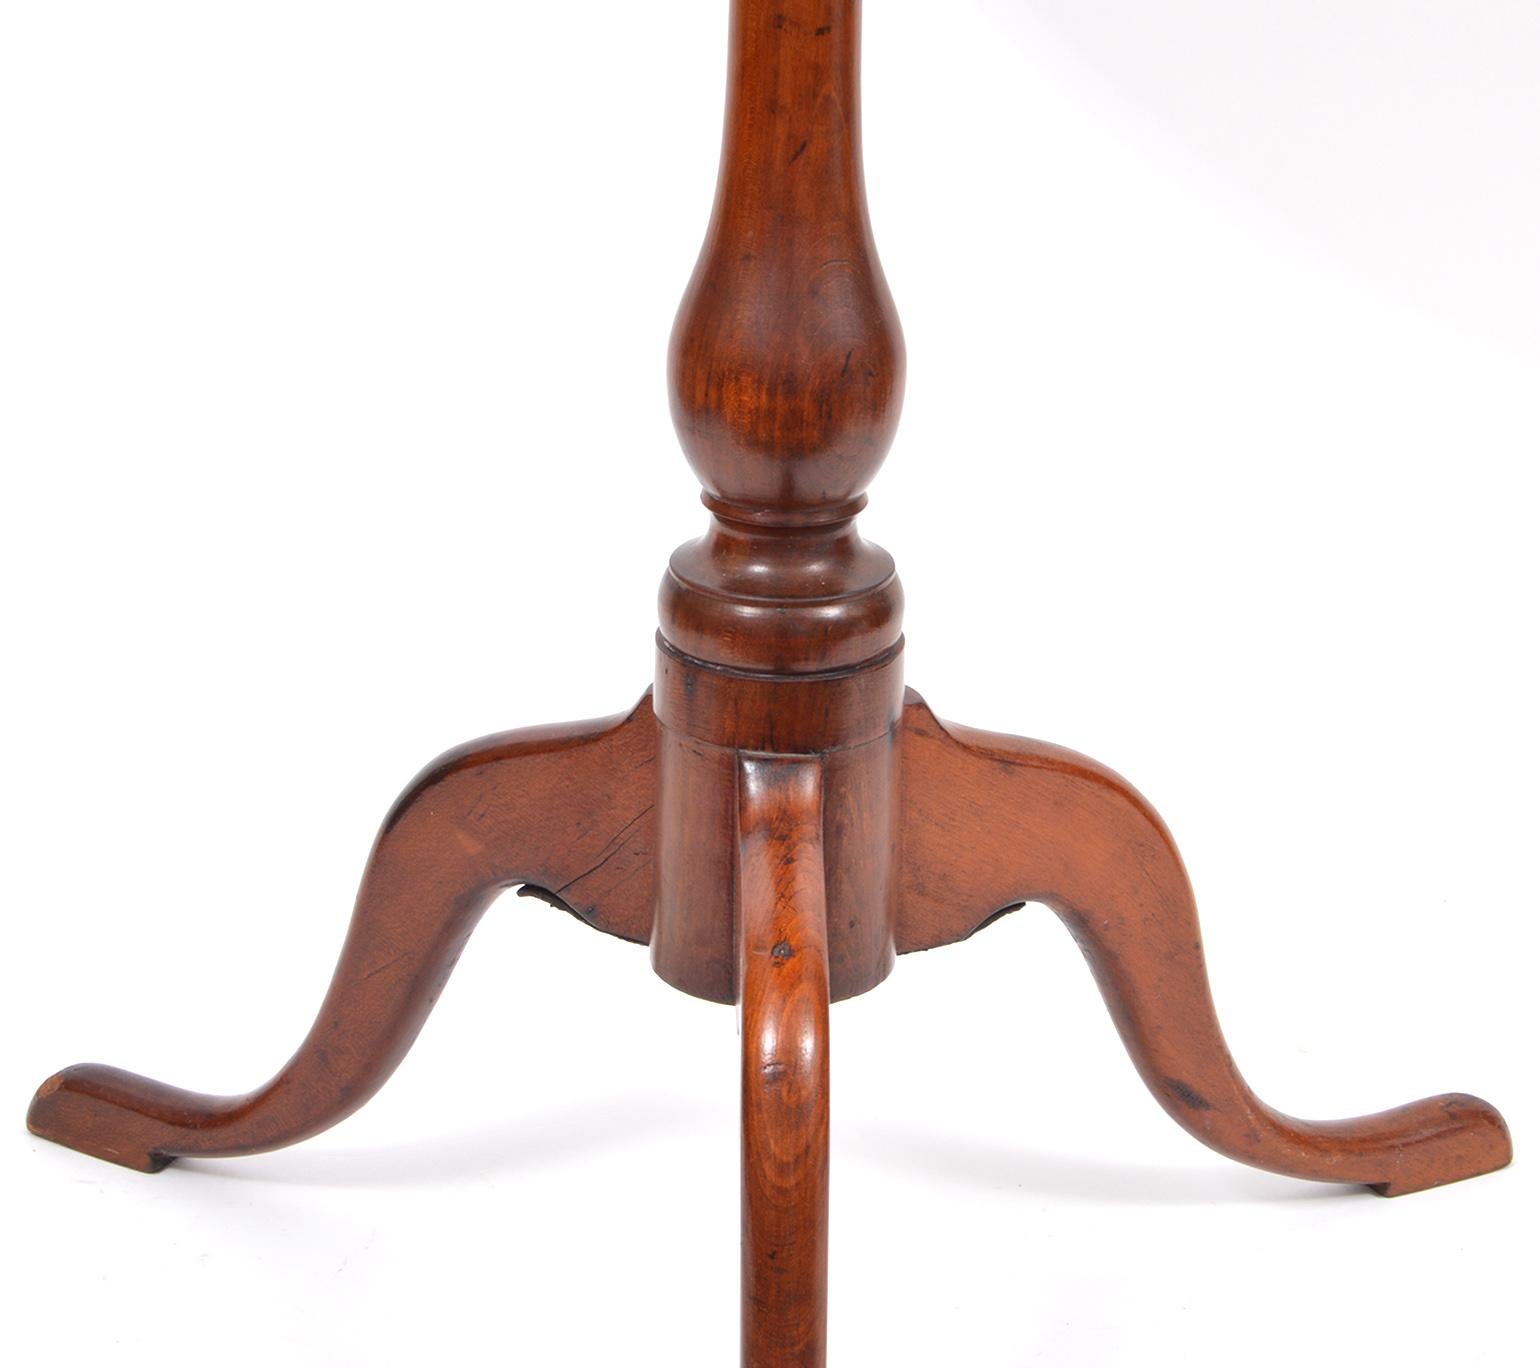 This great new England cherry candle stand features a round top above an oakwood structural support and a balluster turned column resting on three wide cabriole legs with pad feet.